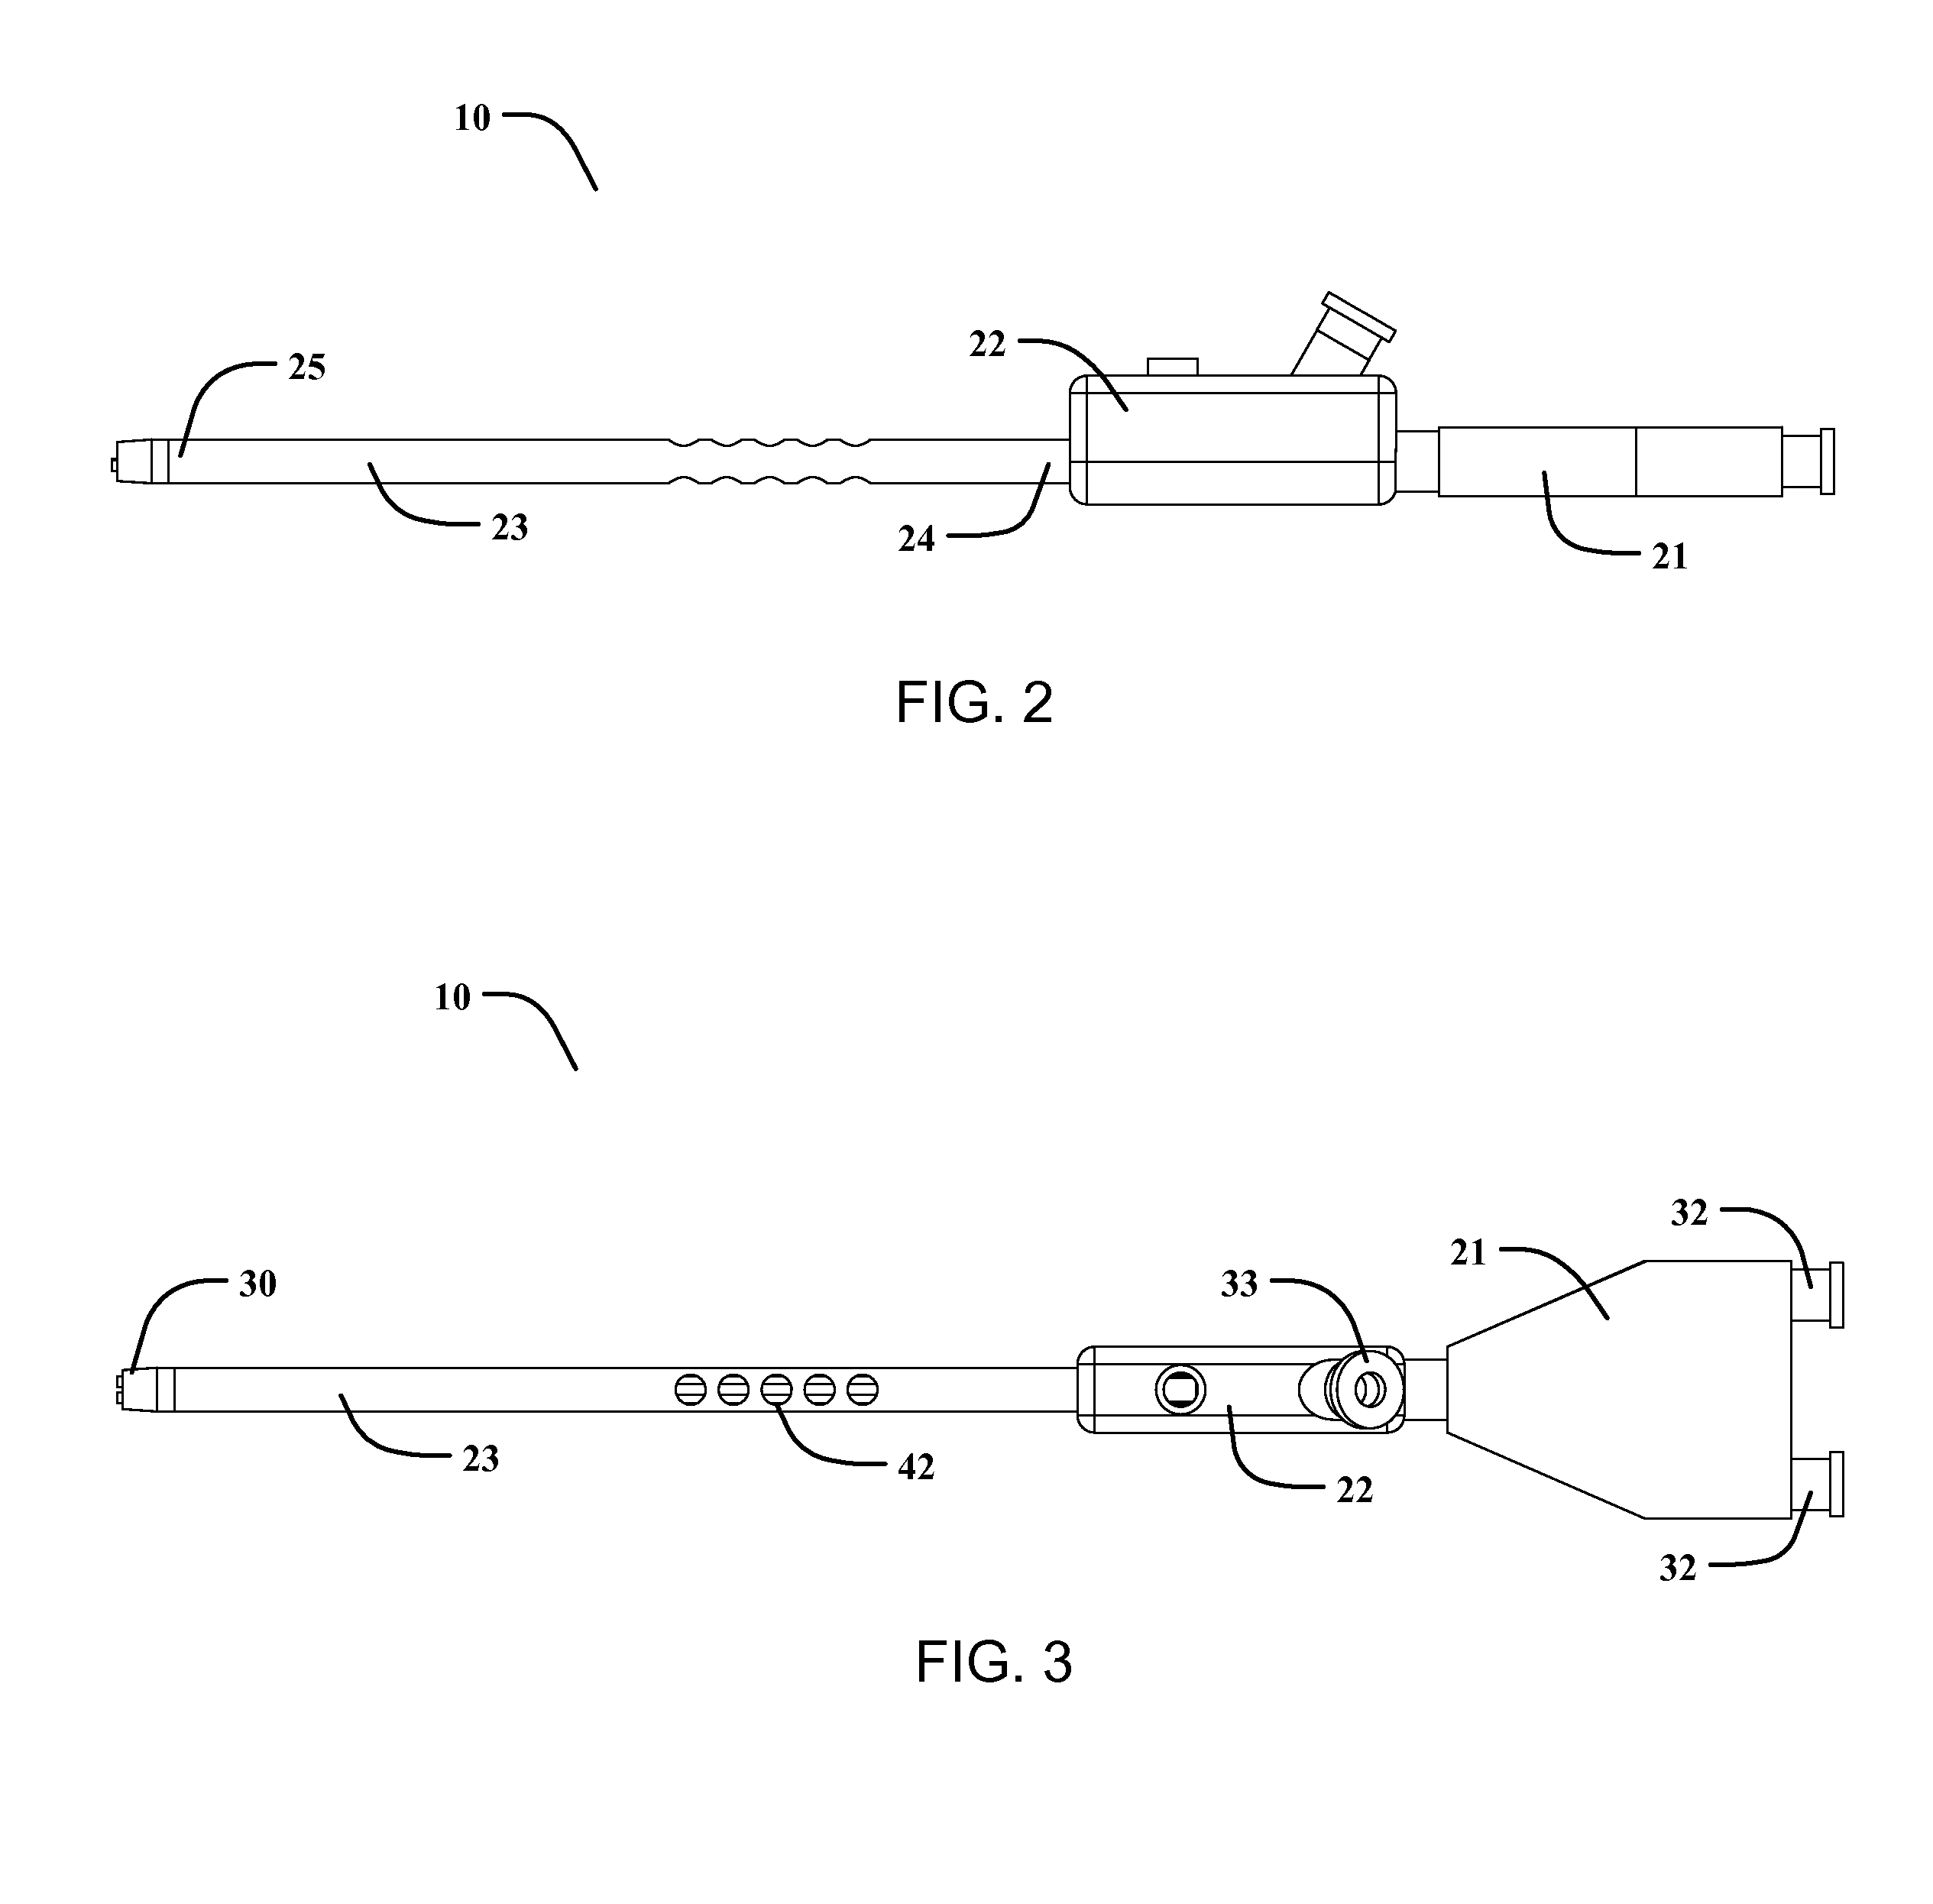 Method and apparatus for a self-venting endoscopic biomaterial applicator